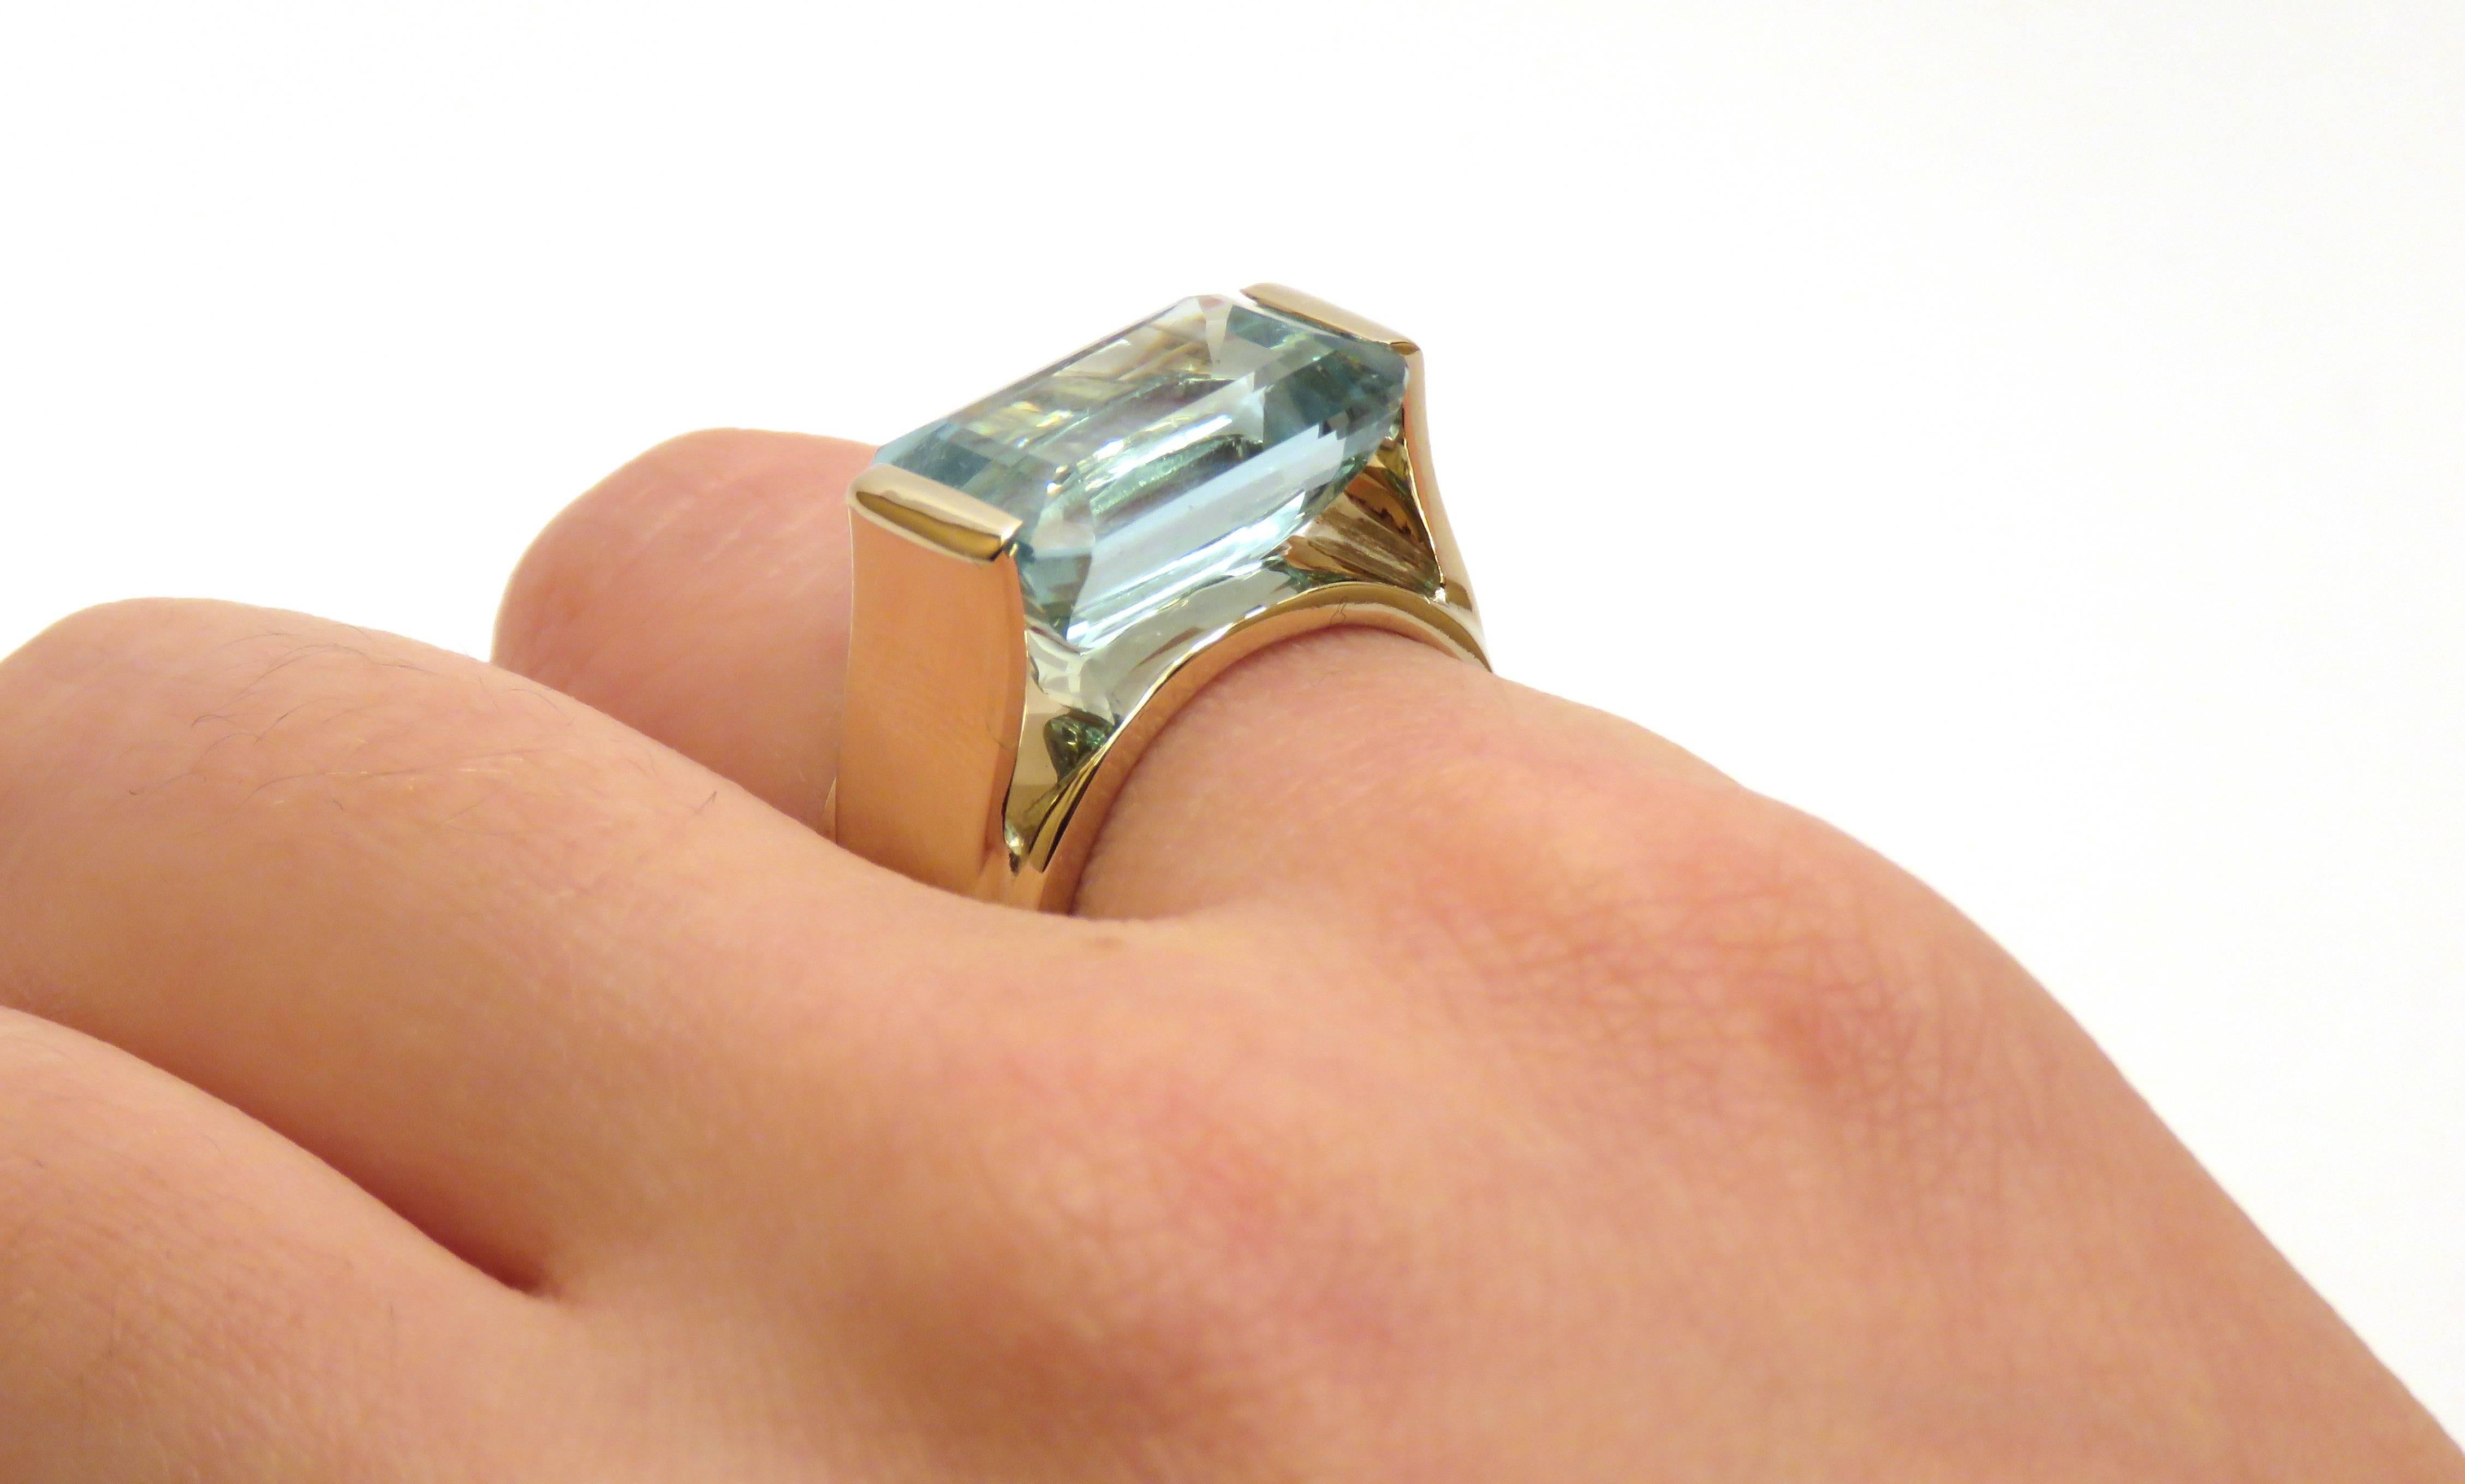 White 18 Kt Gold Cocktail Ring with Aquamarine. Modern design by Botta Gioielli.
Emerald cut aquamarine 7.61 ctw
14x9 millimeters / 0,551181x0,354331 inches
Us size 6 3/4 / ITALIAN size 14 / FRENCH size 54 / can be resized
It  is stamped with the